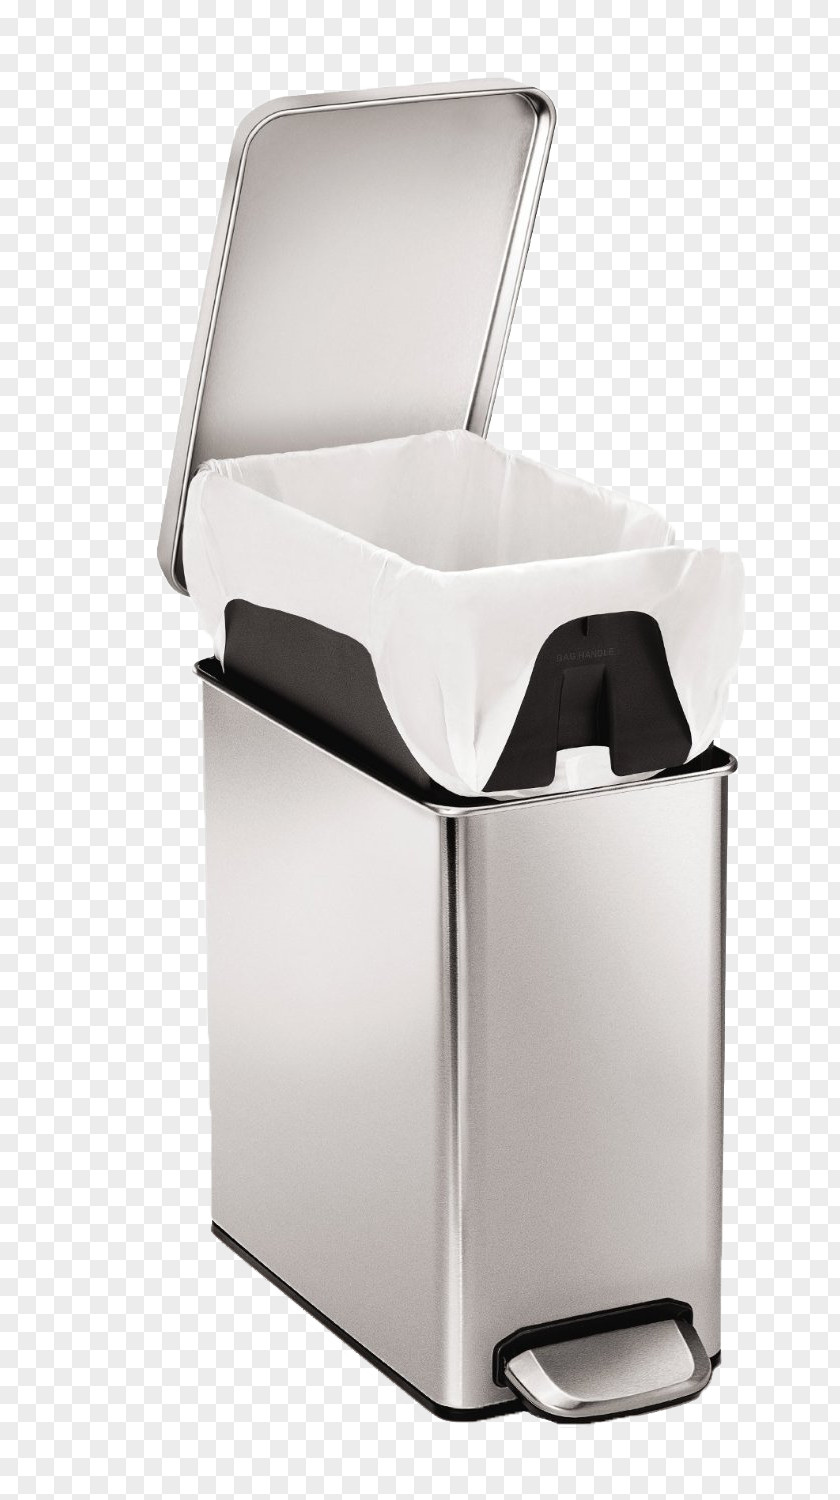 Covered Trash Can Mute Waste Container Simplehuman Stainless Steel Liter PNG